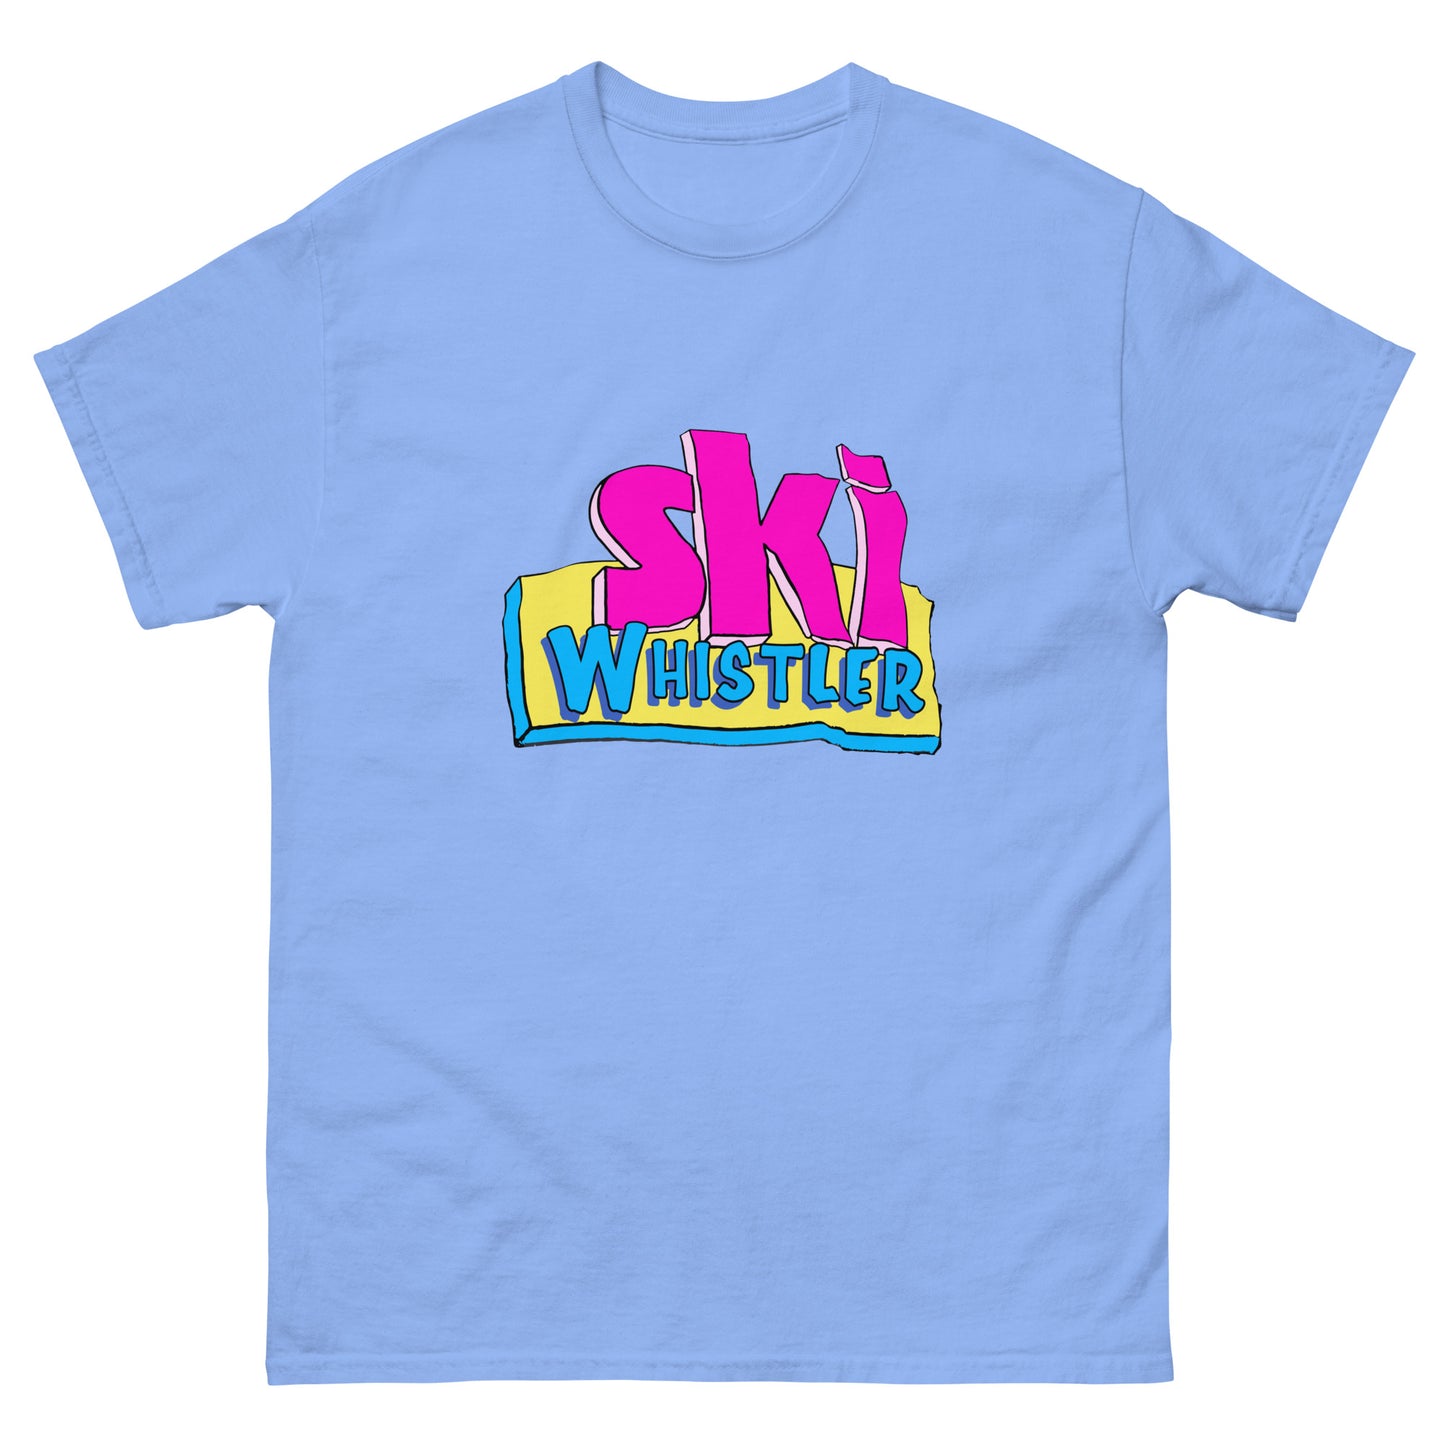 Ski Whistler printed in cartoon text on t-shirt by Whistler Shirts